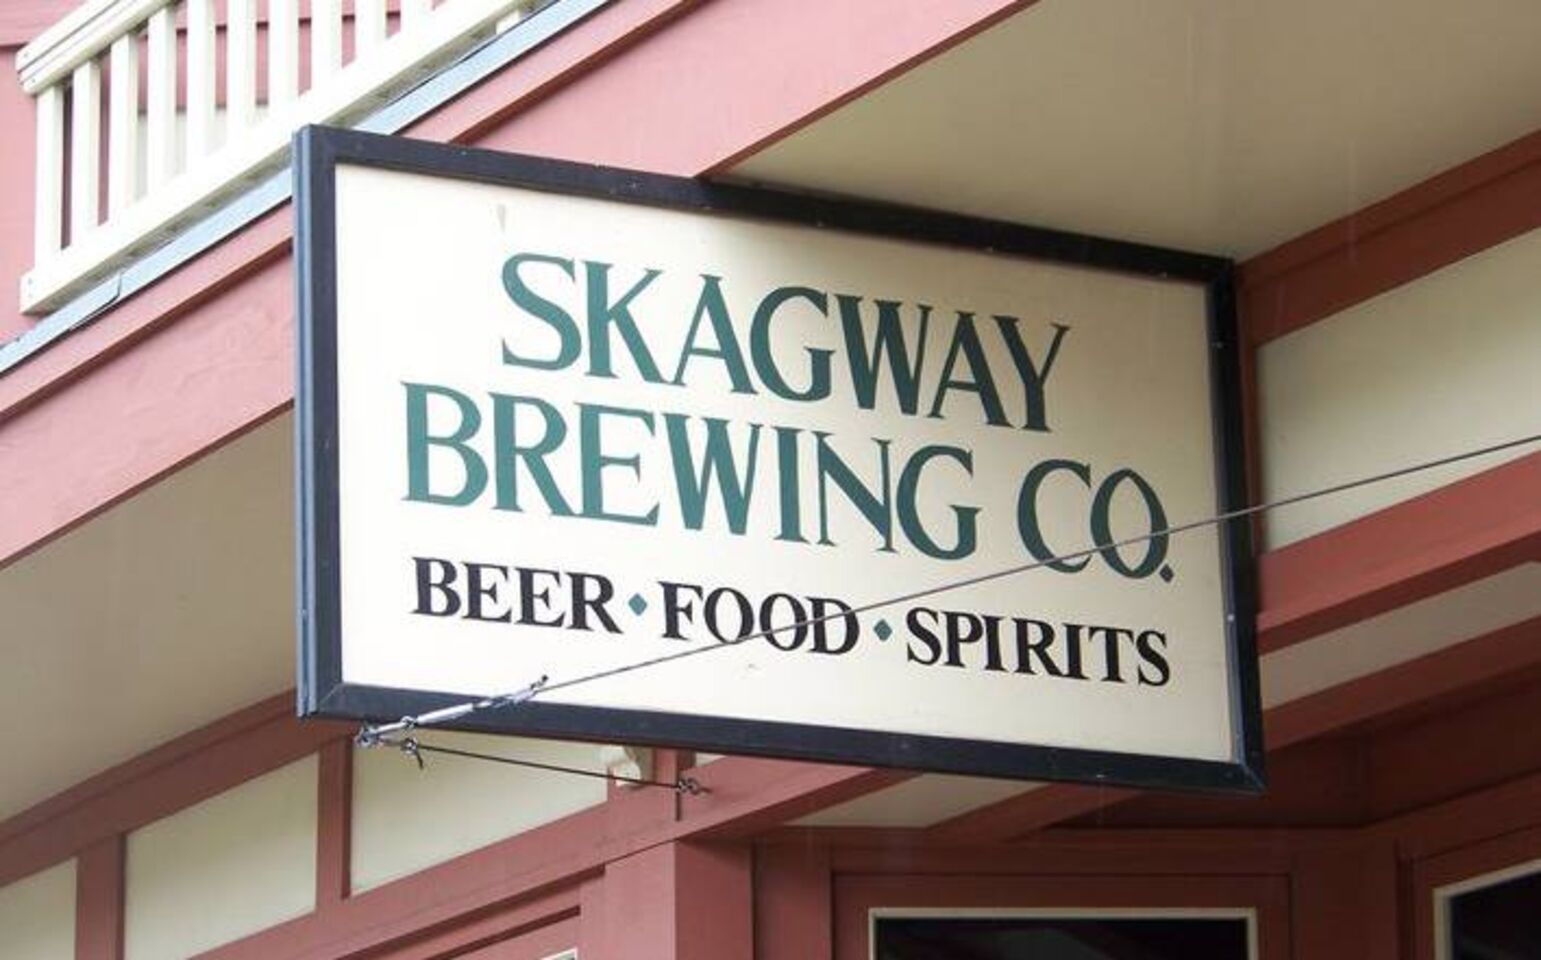 A photo of Skagway Brewing Co.